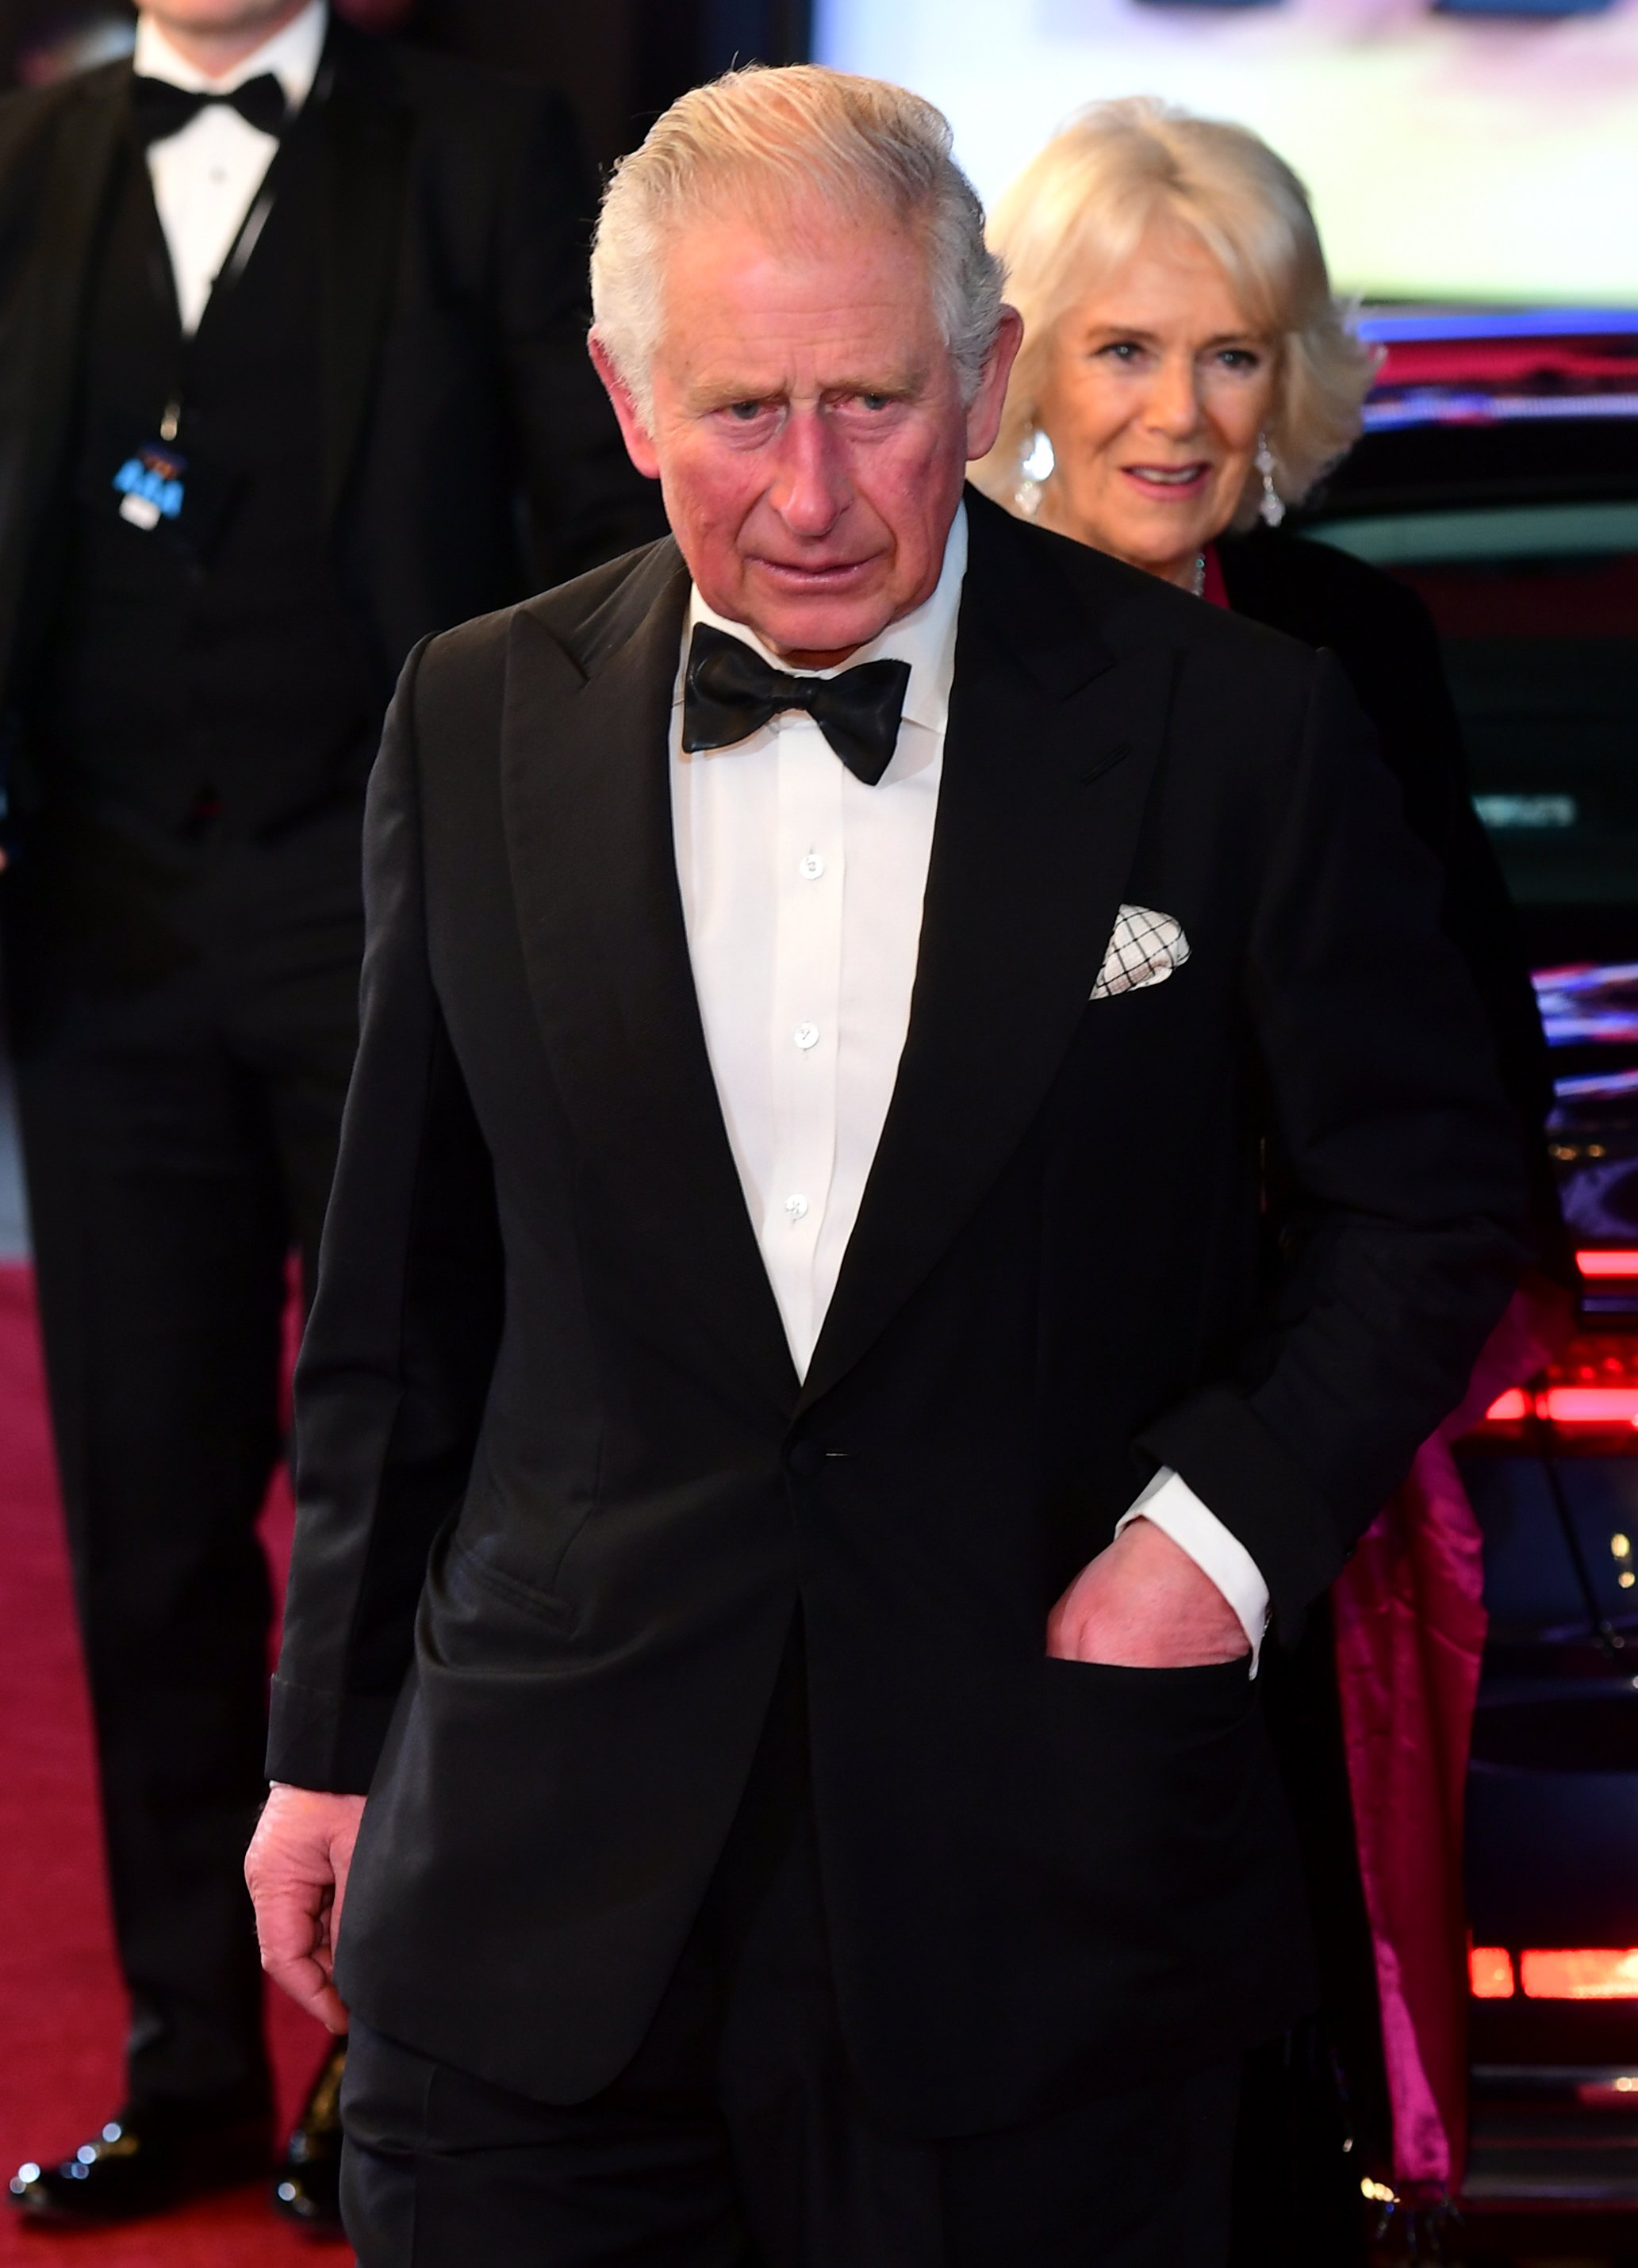 Charles, Prince of Wales attending the 1917 World Premiere at Leicester Square, London in December 2019 | Source: Getty Images